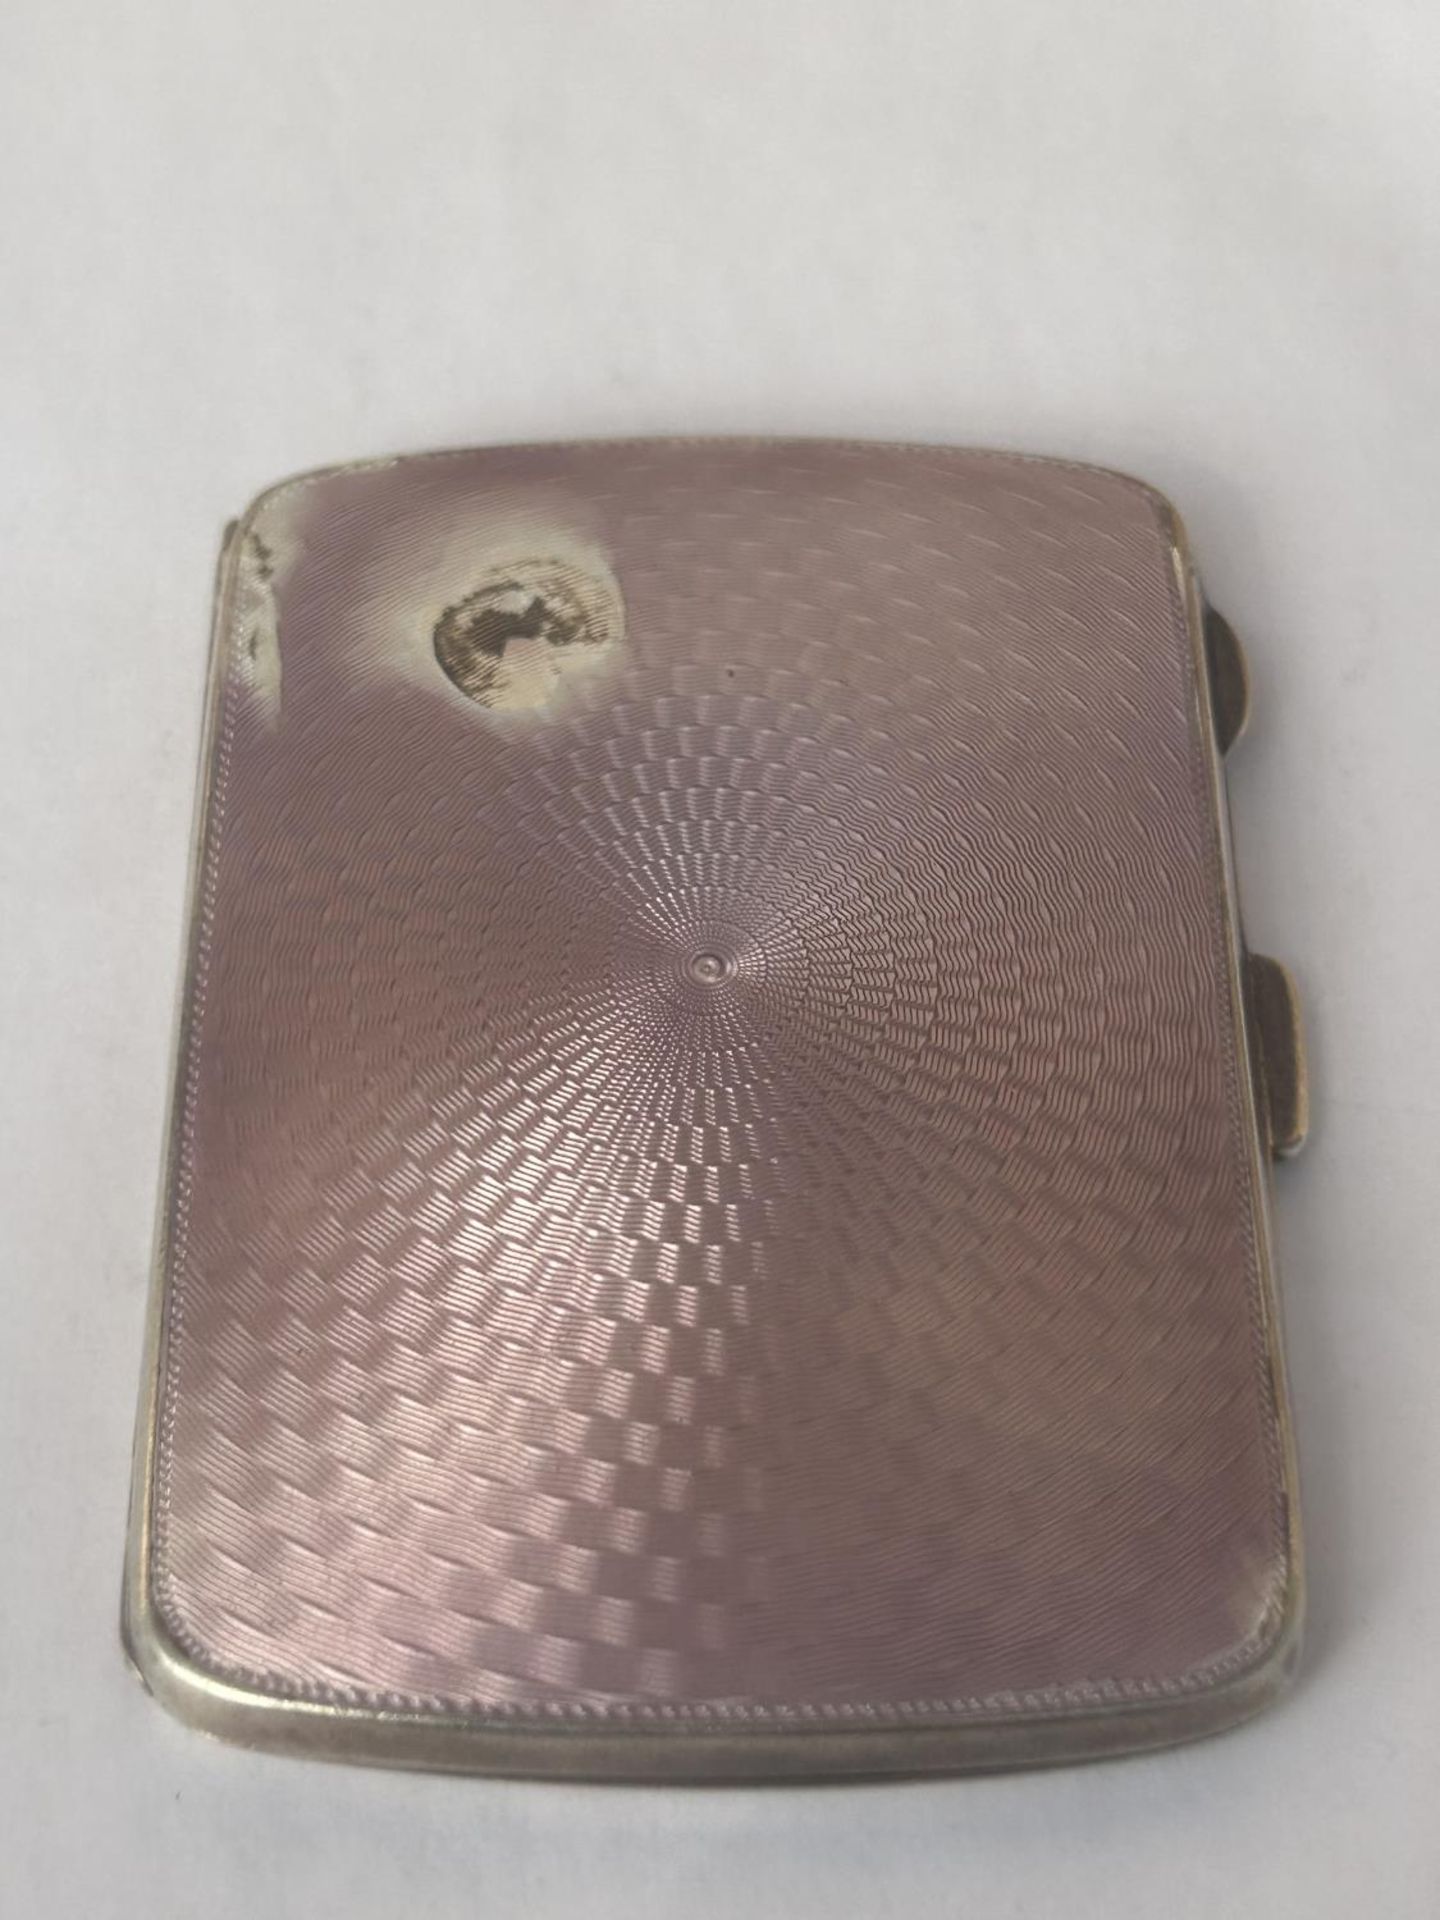 A GEORGE V HALLMARKED SILVER AND GUILLOCHE ENAMELED CIGARETTE CASE, BY HENRY MATTHEWS BIRMINGHAM